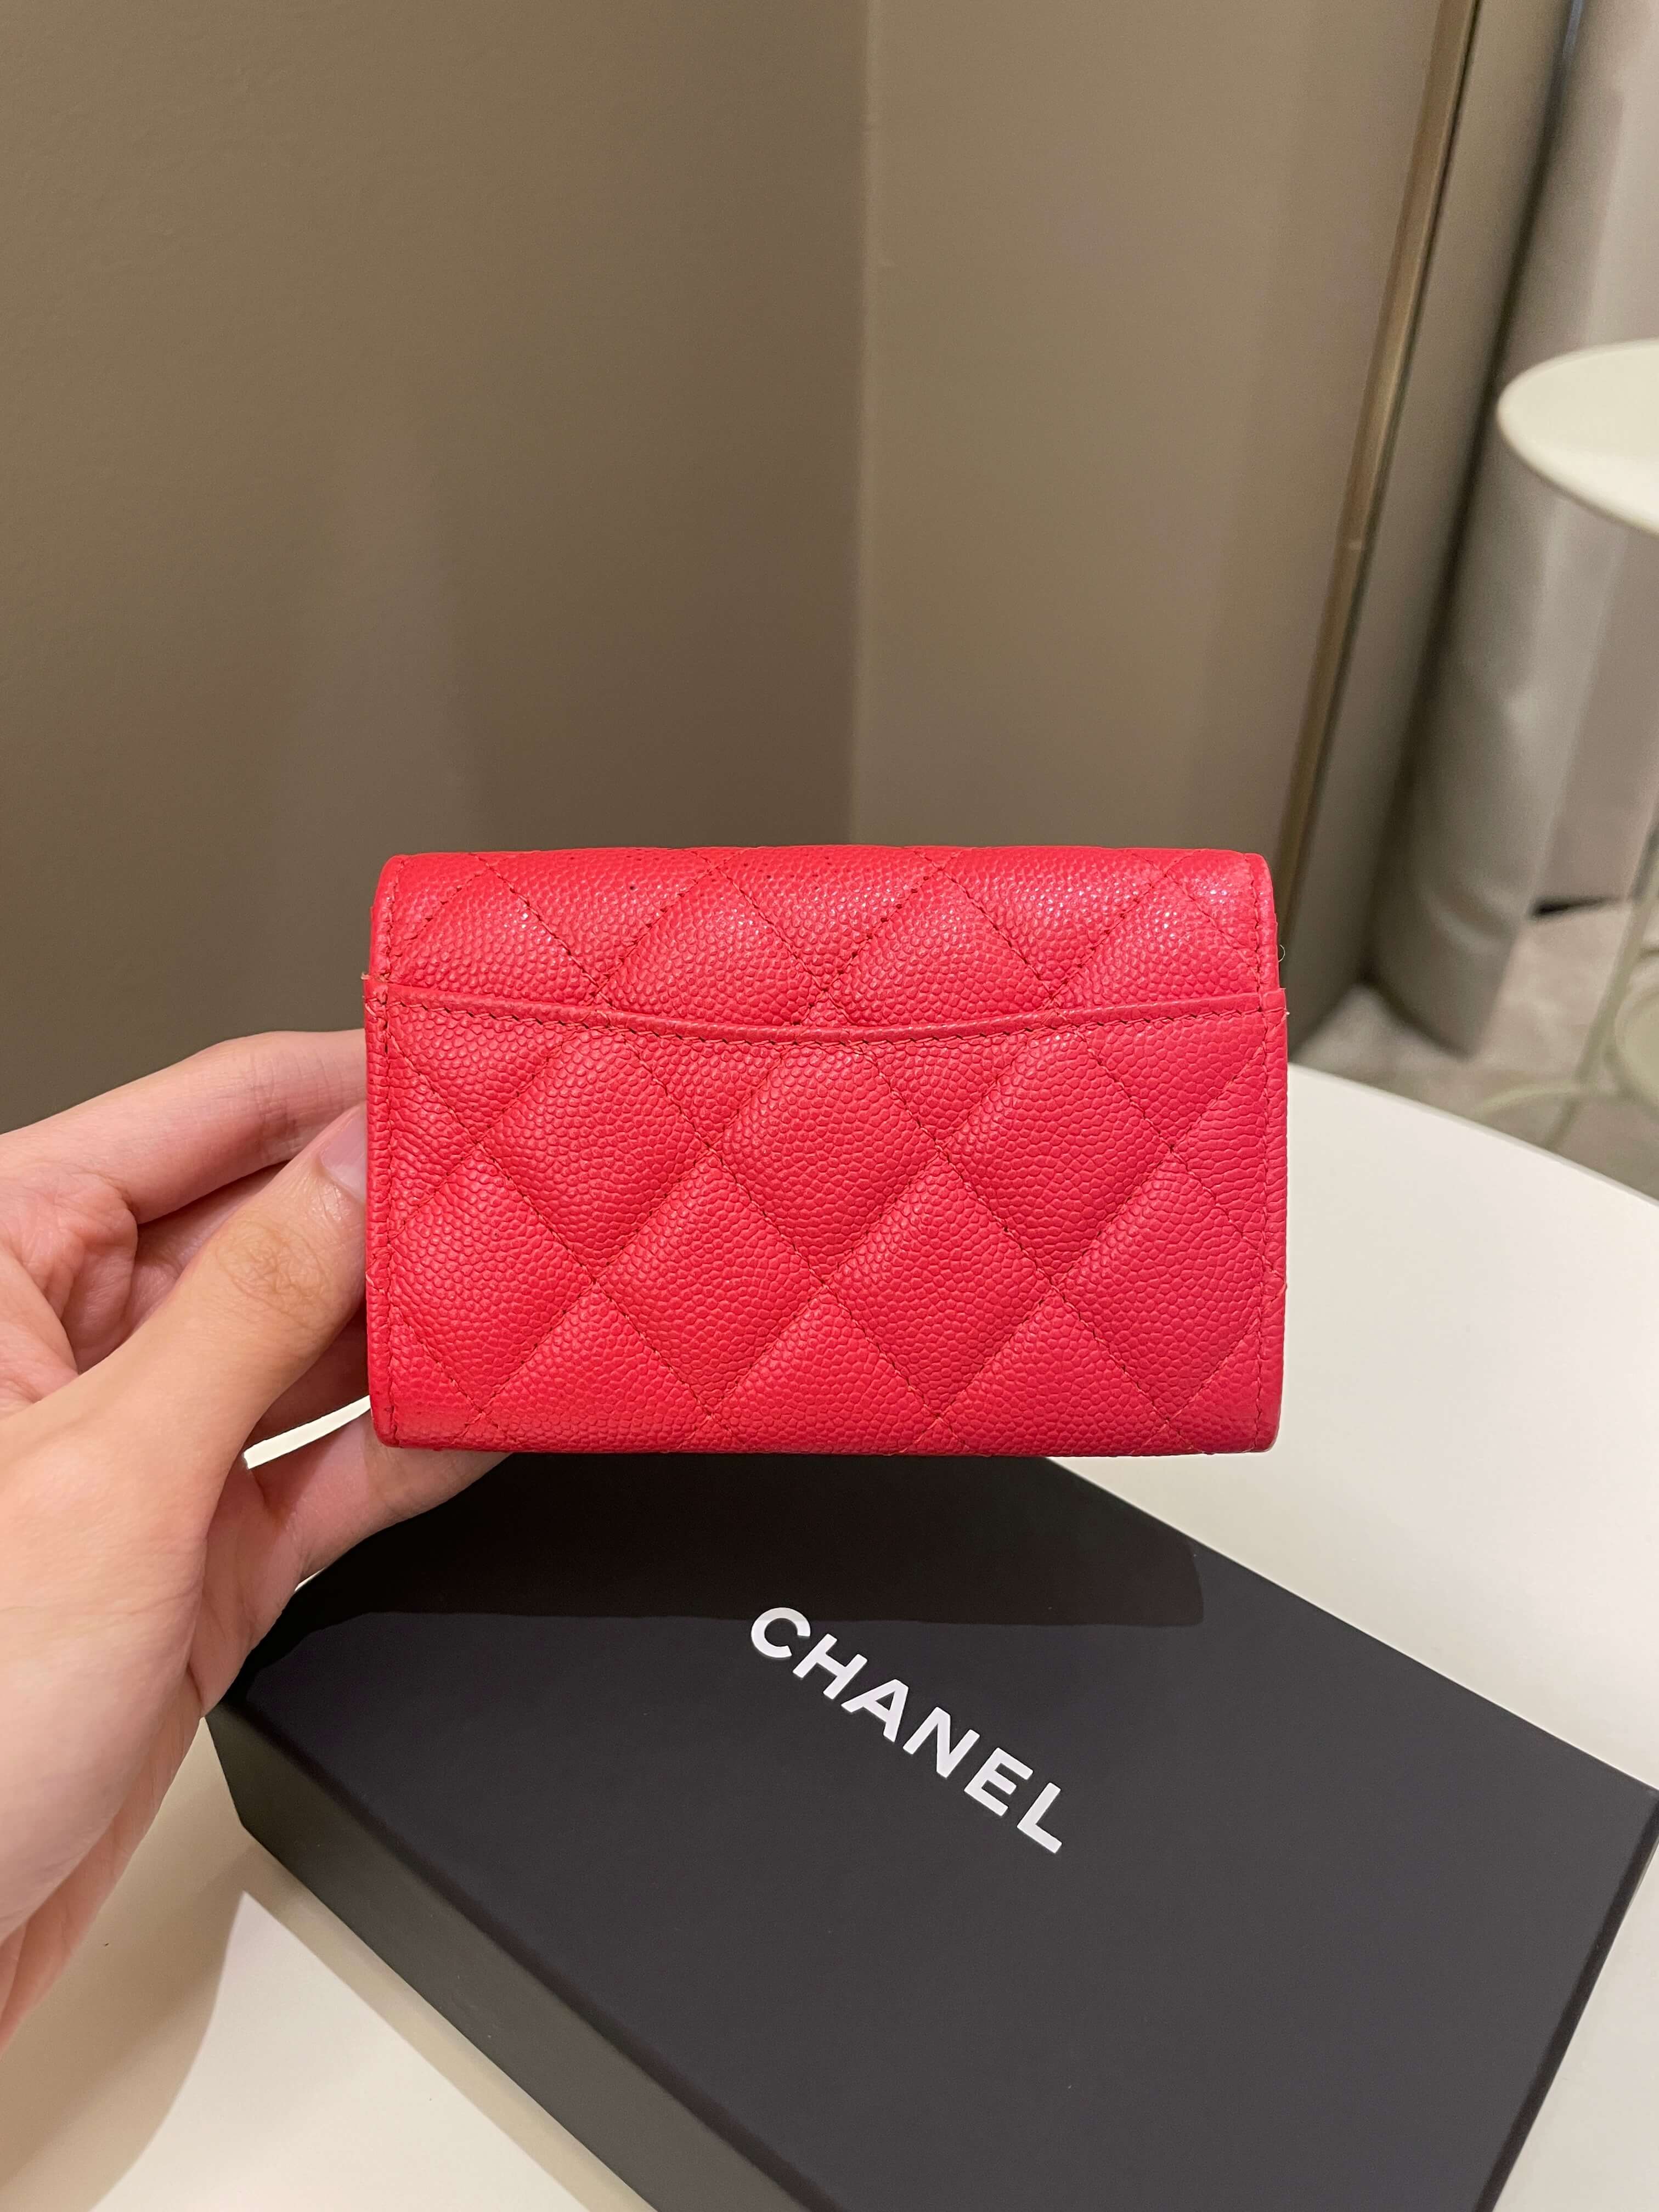 Chanel Key Holder Review 